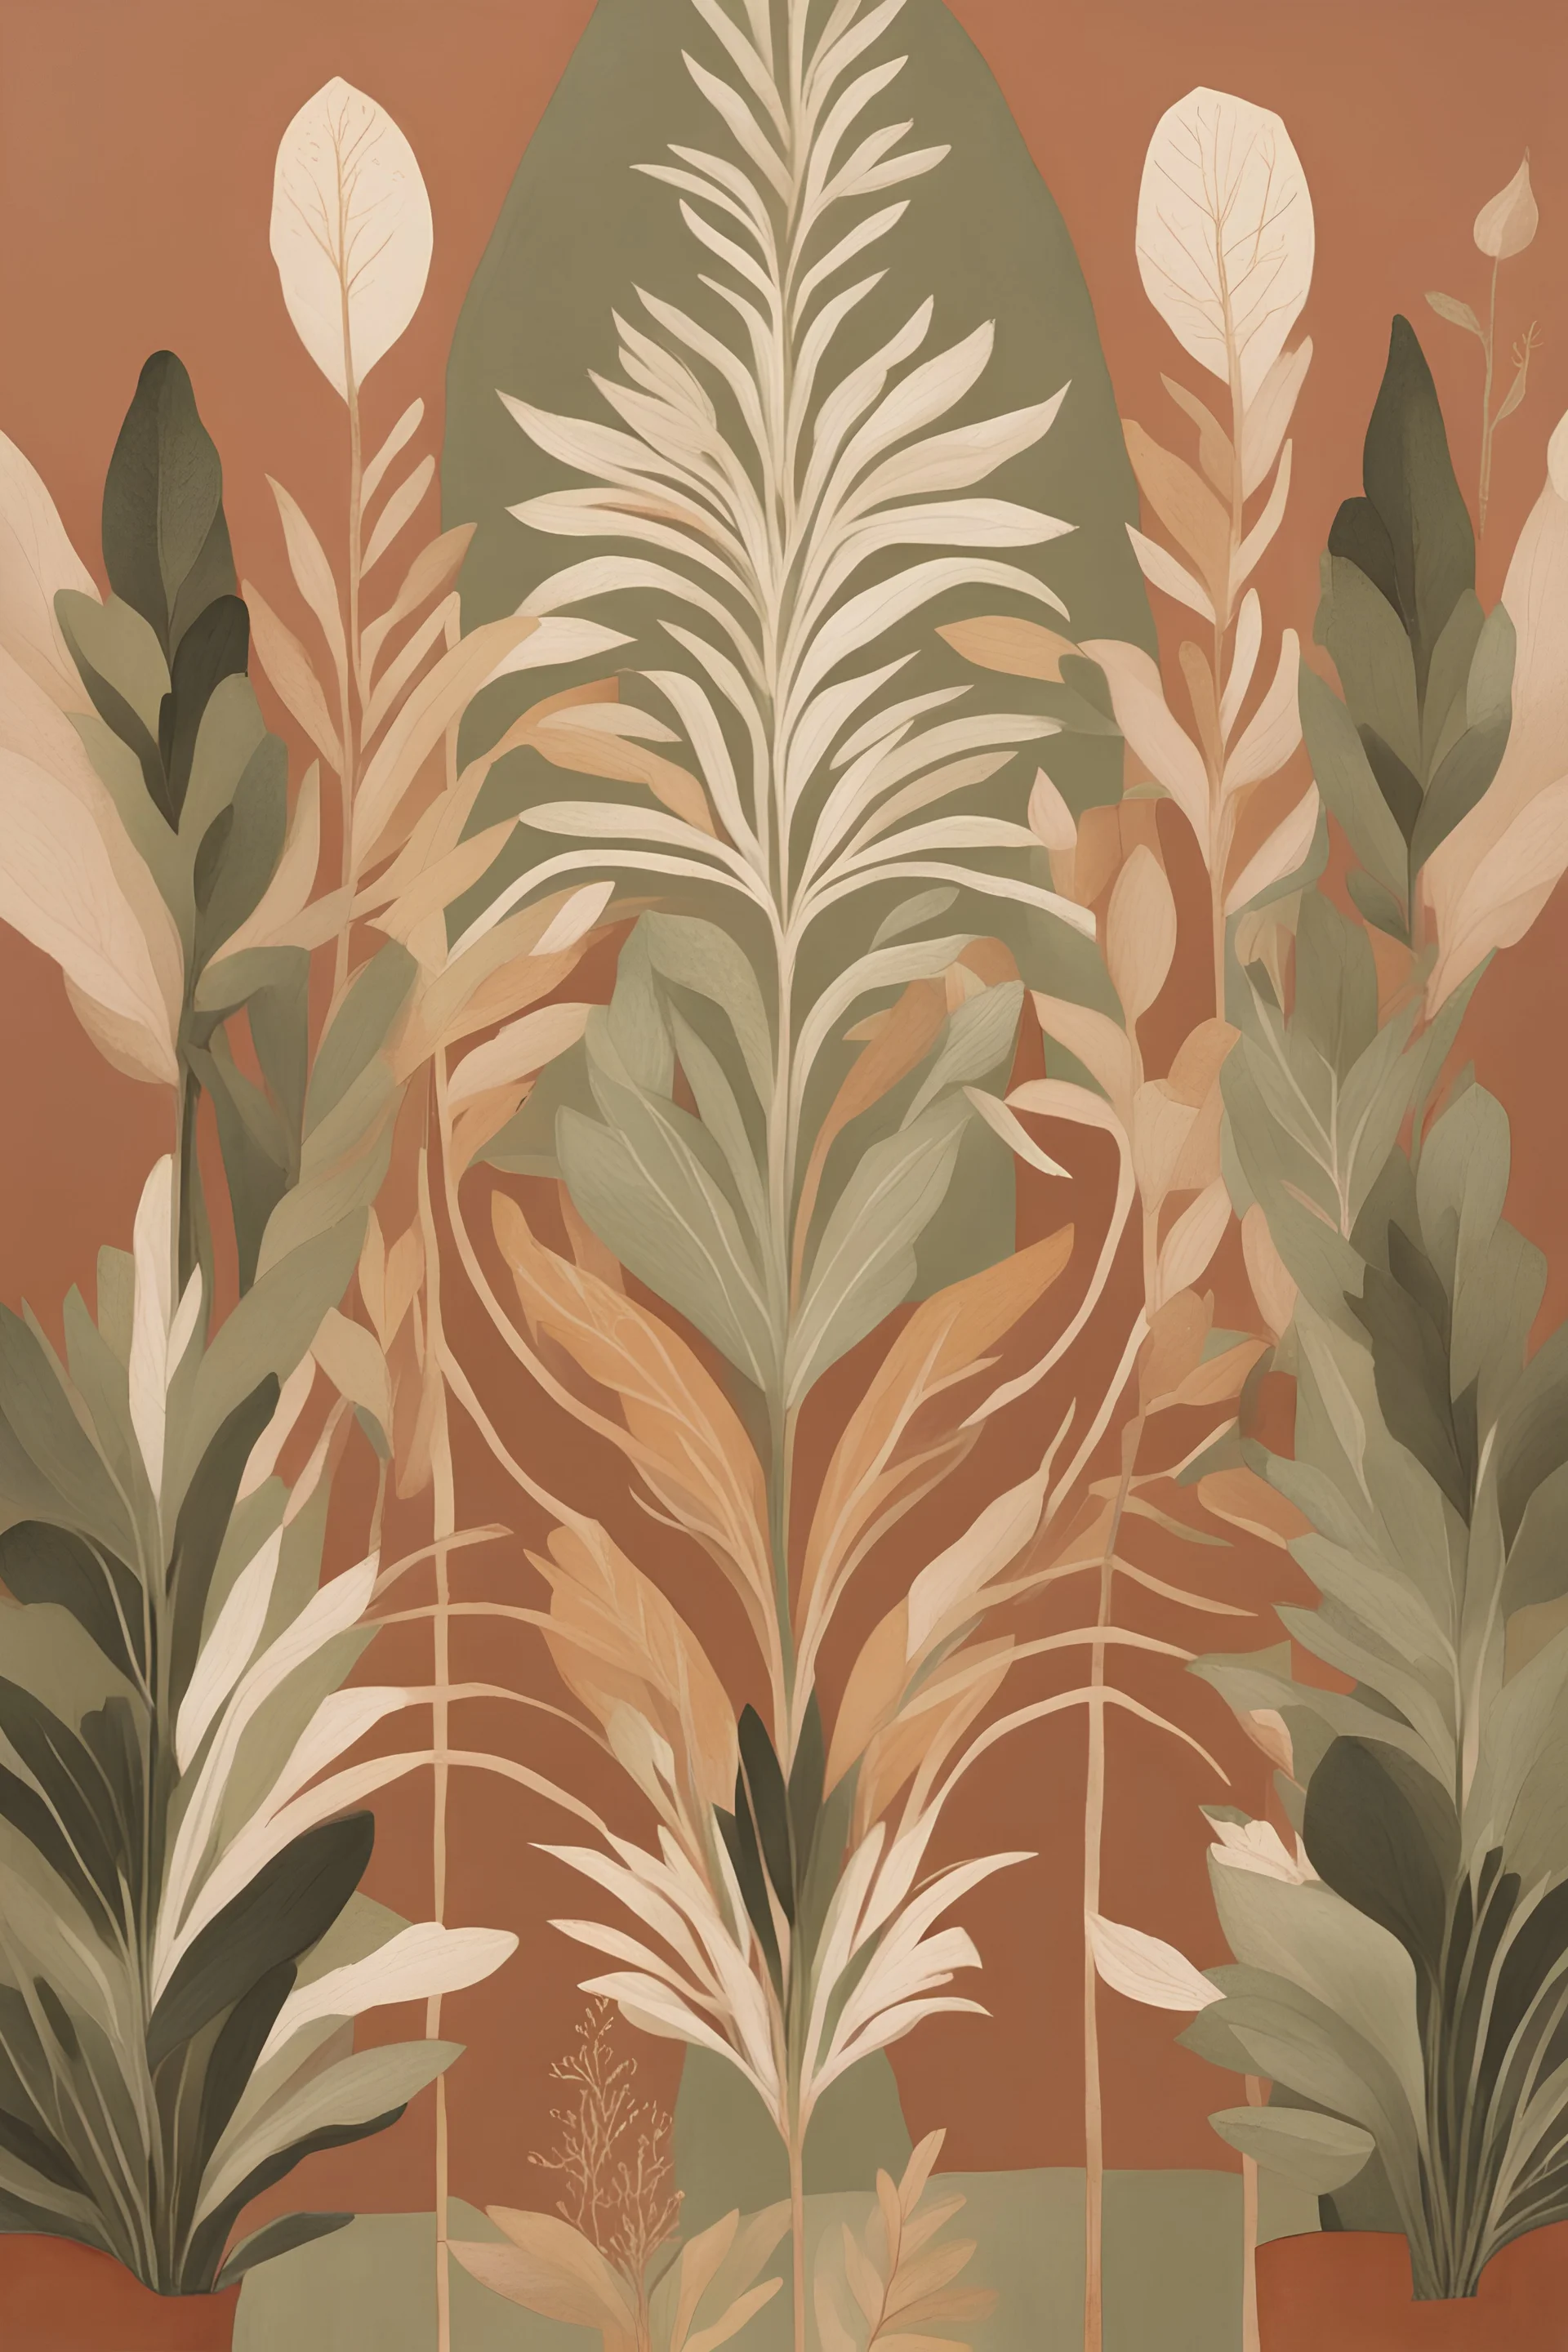 Generate a handpainted mural inspired by the earthy tones of nature. Use symmetrical patterns in terracotta and olive green, complemented by beige and gold details for a sophisticated and organic feel.